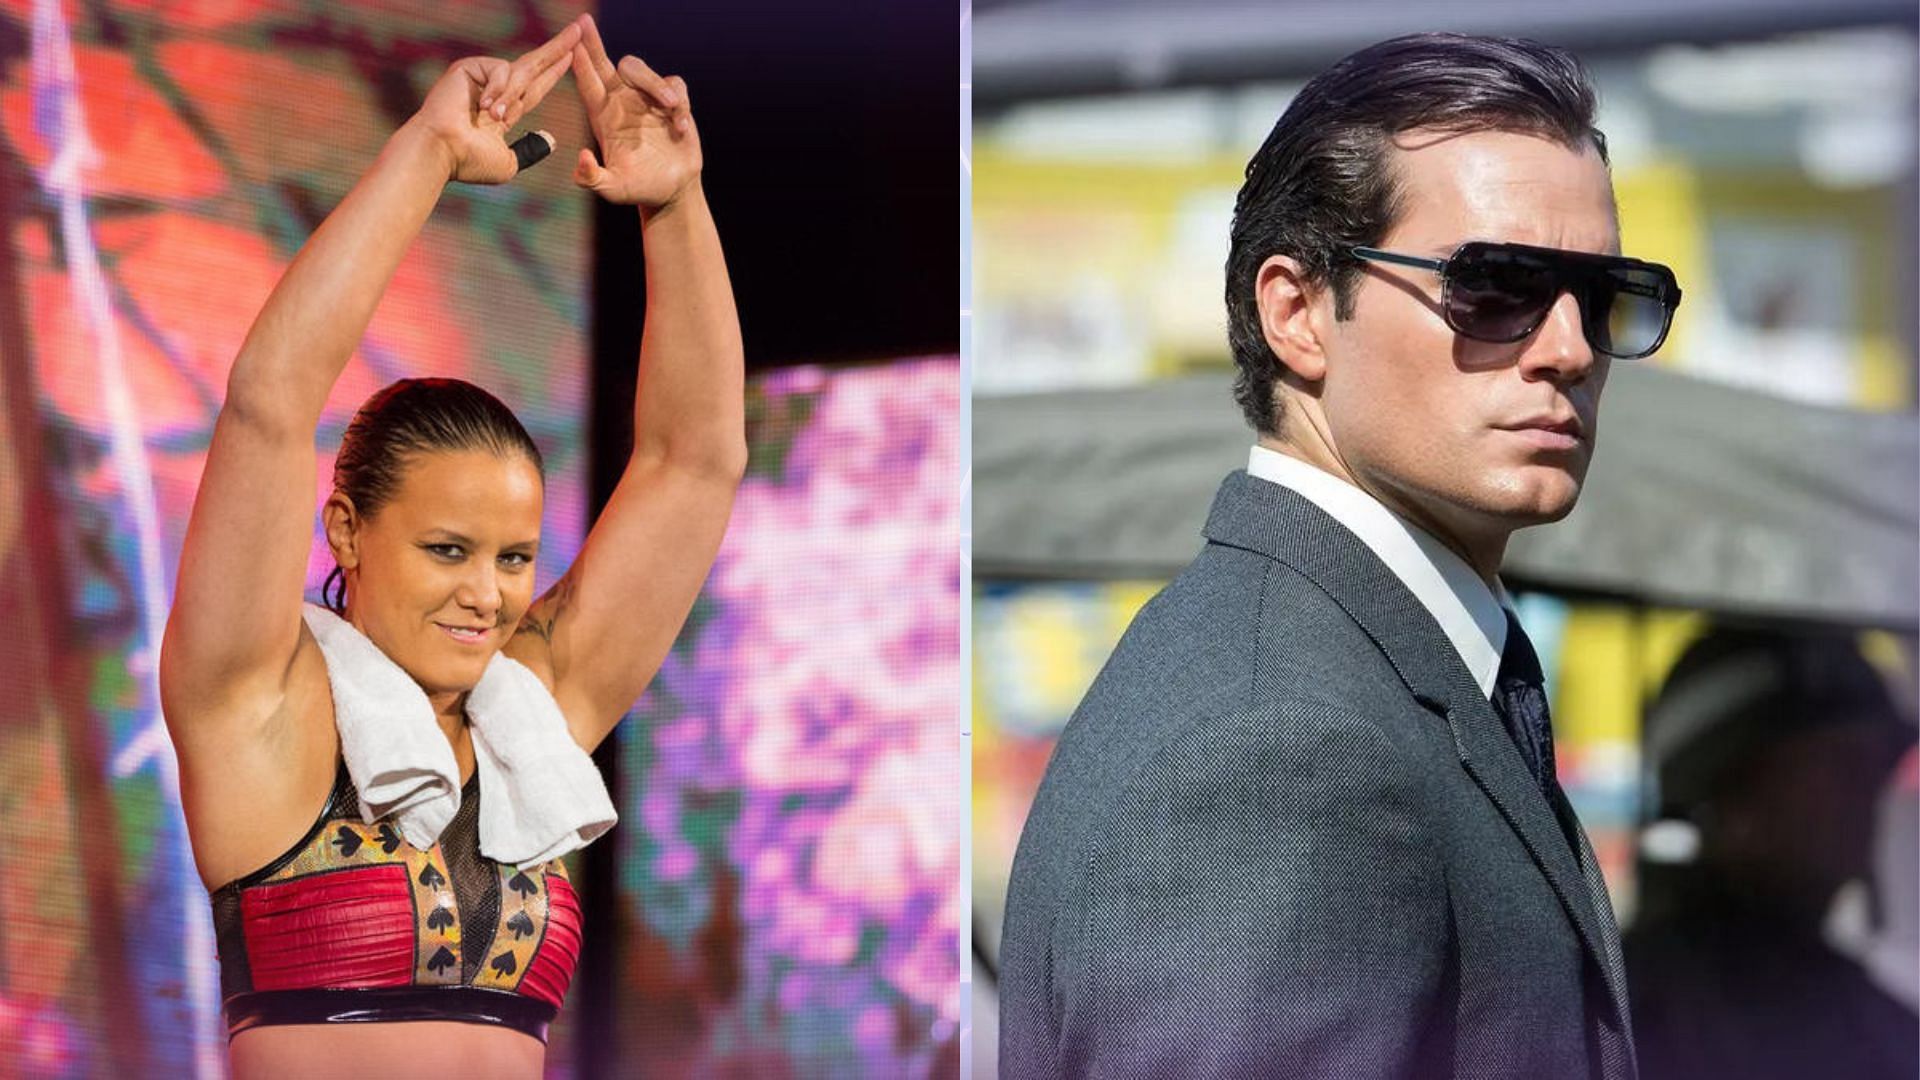 Shayna Baszler trying her best to get Henry Cavill